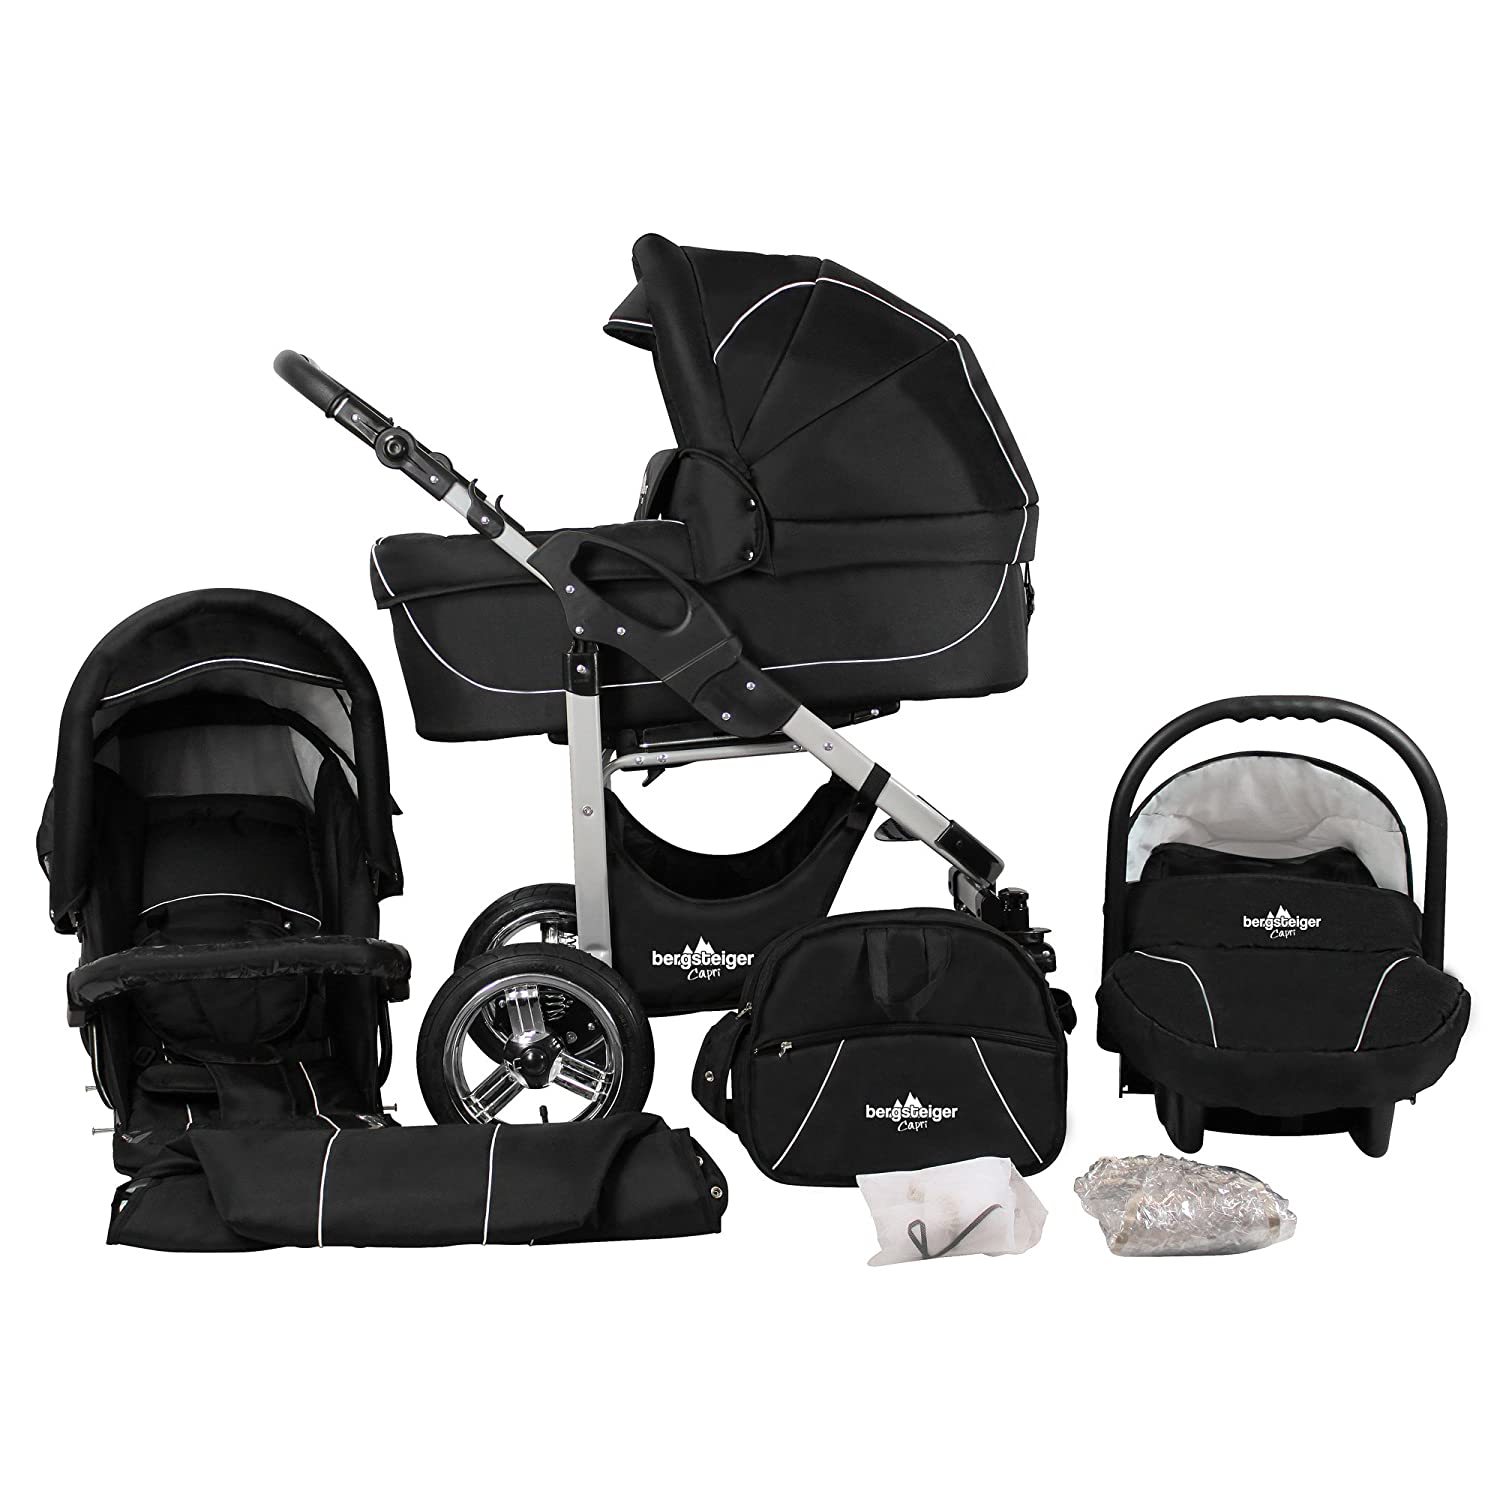 Bergsteiger Capri pushchair 3 in 1 combination pushchair Megaset 10 parts incl. Baby seat, baby carriage, sports pram and accessories.